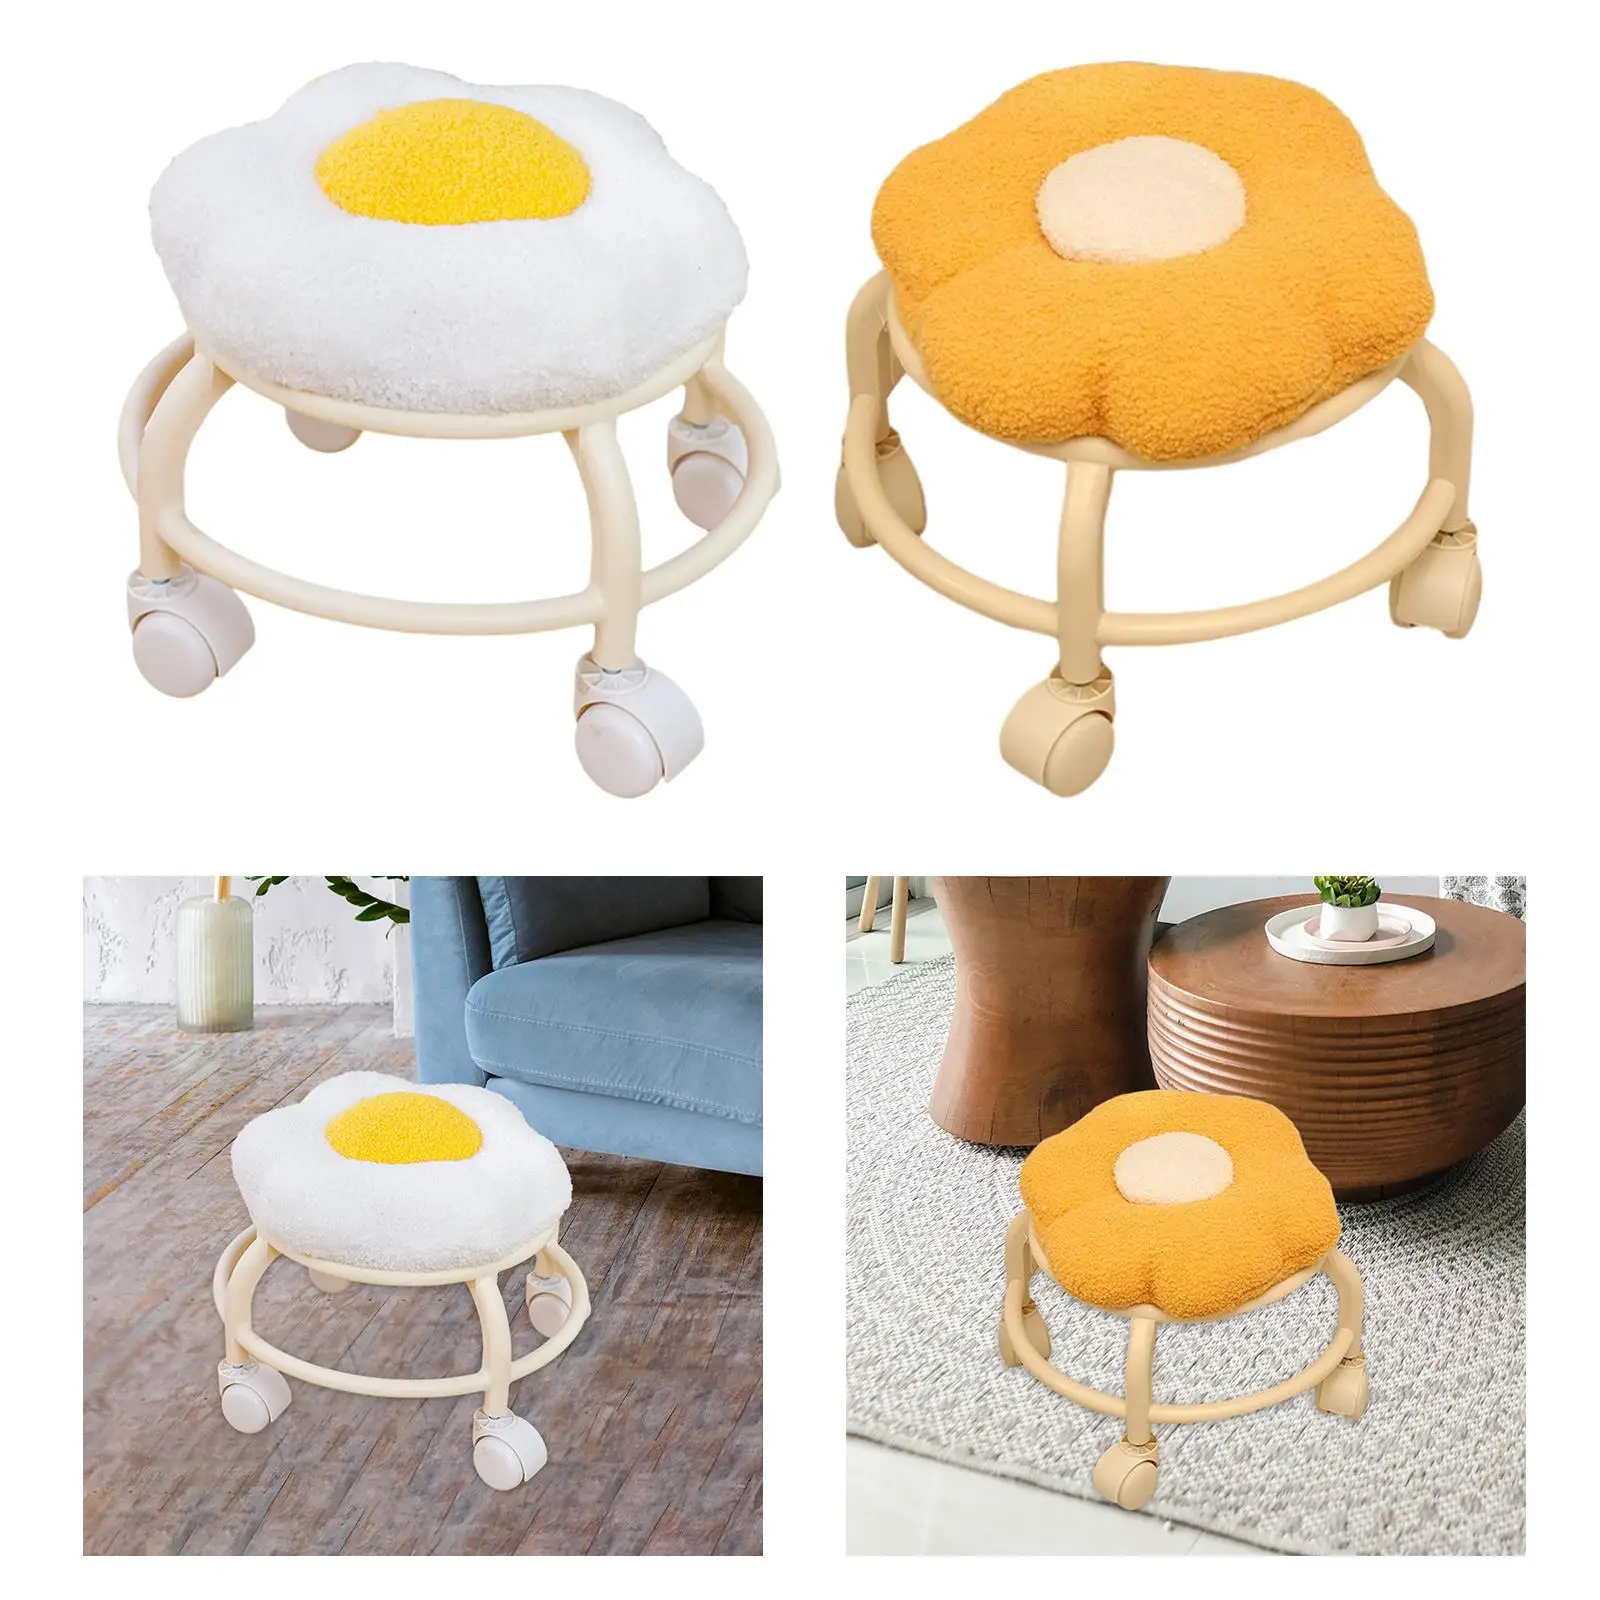 Rolling Stool with Universal Swivel Caster Wheels Foot Rest Flower Shape Footrest for Bedside Porch Bedroom Living Room Entryway